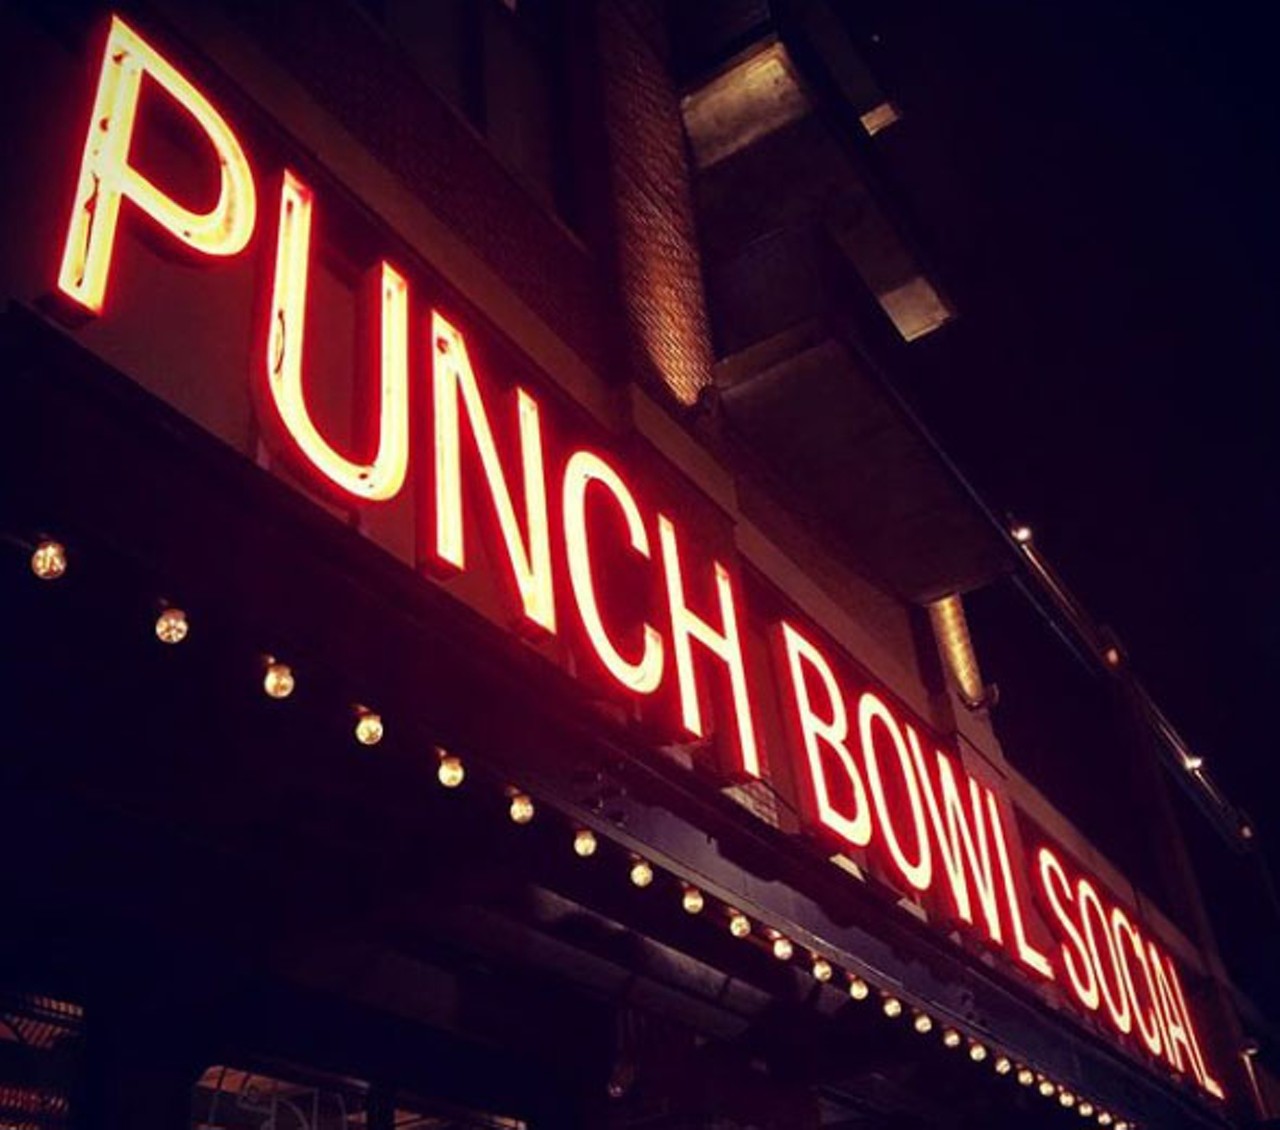 Punch Bowl Social
1086 W. 11th St., 216-239-1508
In addition to various forms of entertainment, Punch Bowl Social has private karaoke for those who want to celebrate a night by singing. One to four guests is $25/hour, and five to 10 guests is $35/hour. 
Photo via clevelandblacksmithing/Instagram